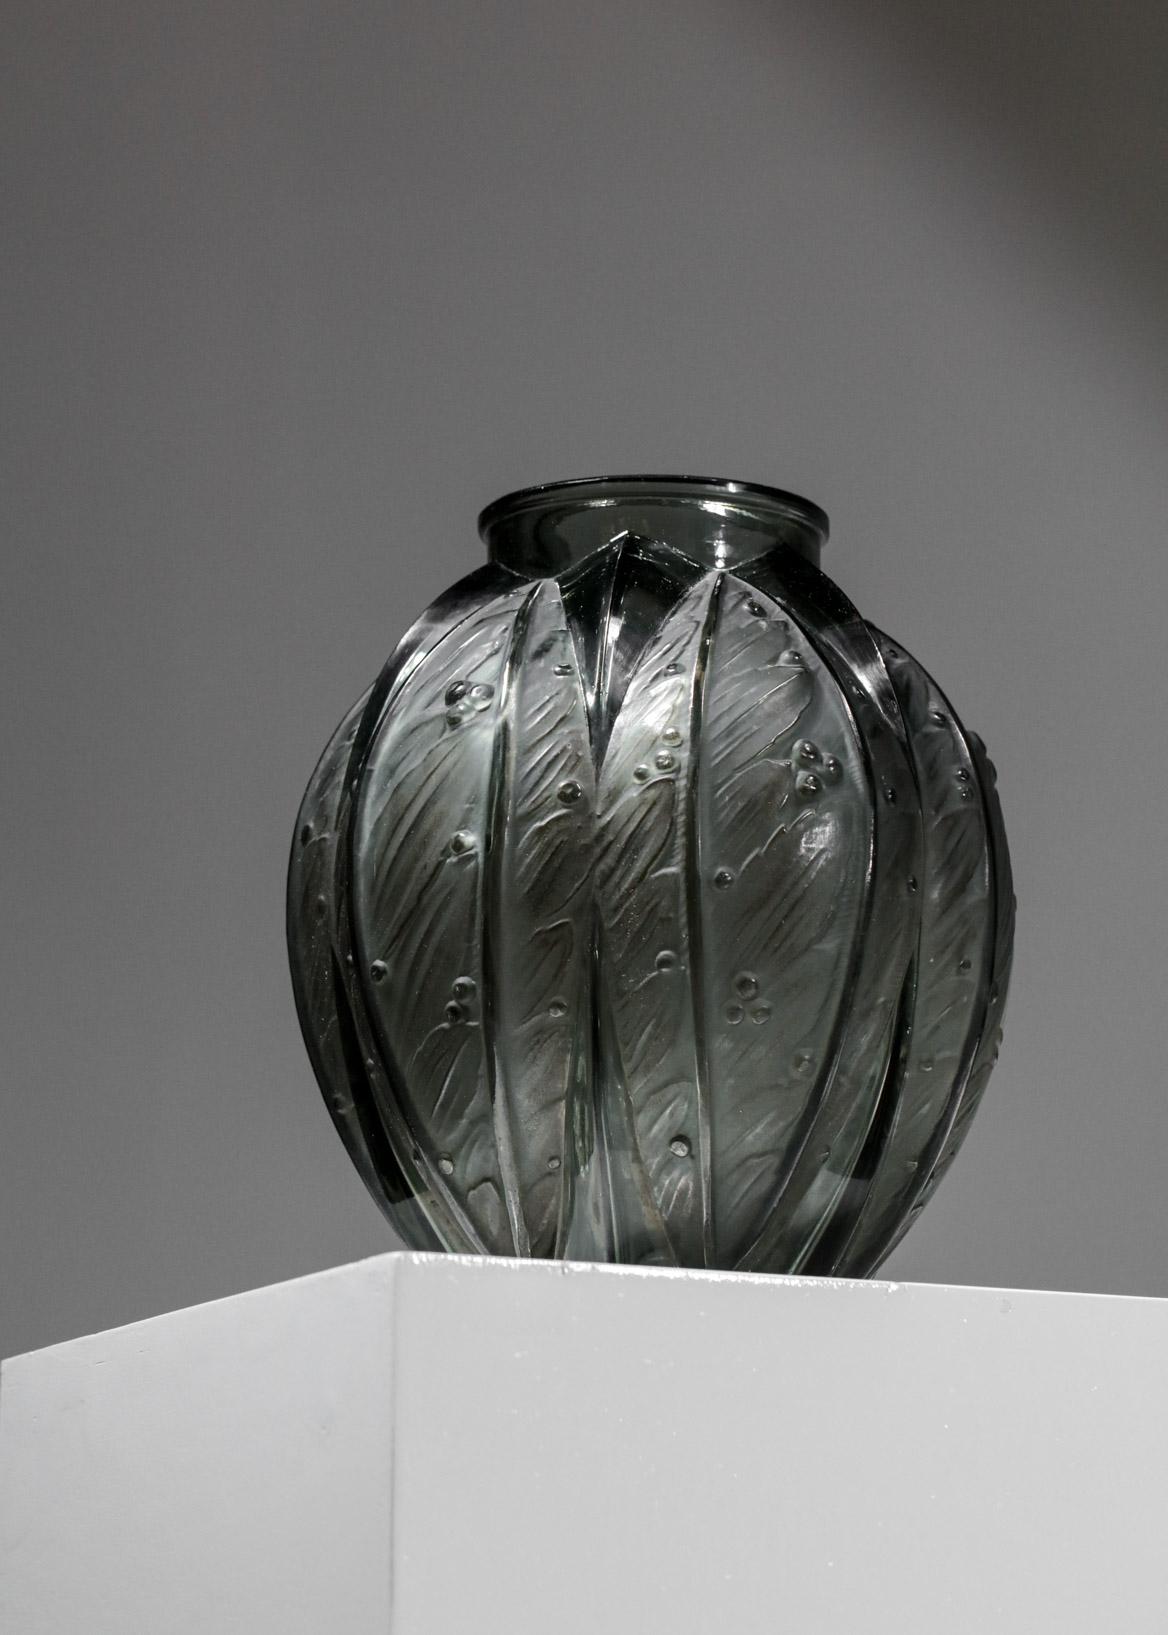 American Large Grey Glass Vase by Verlys from the 1940s